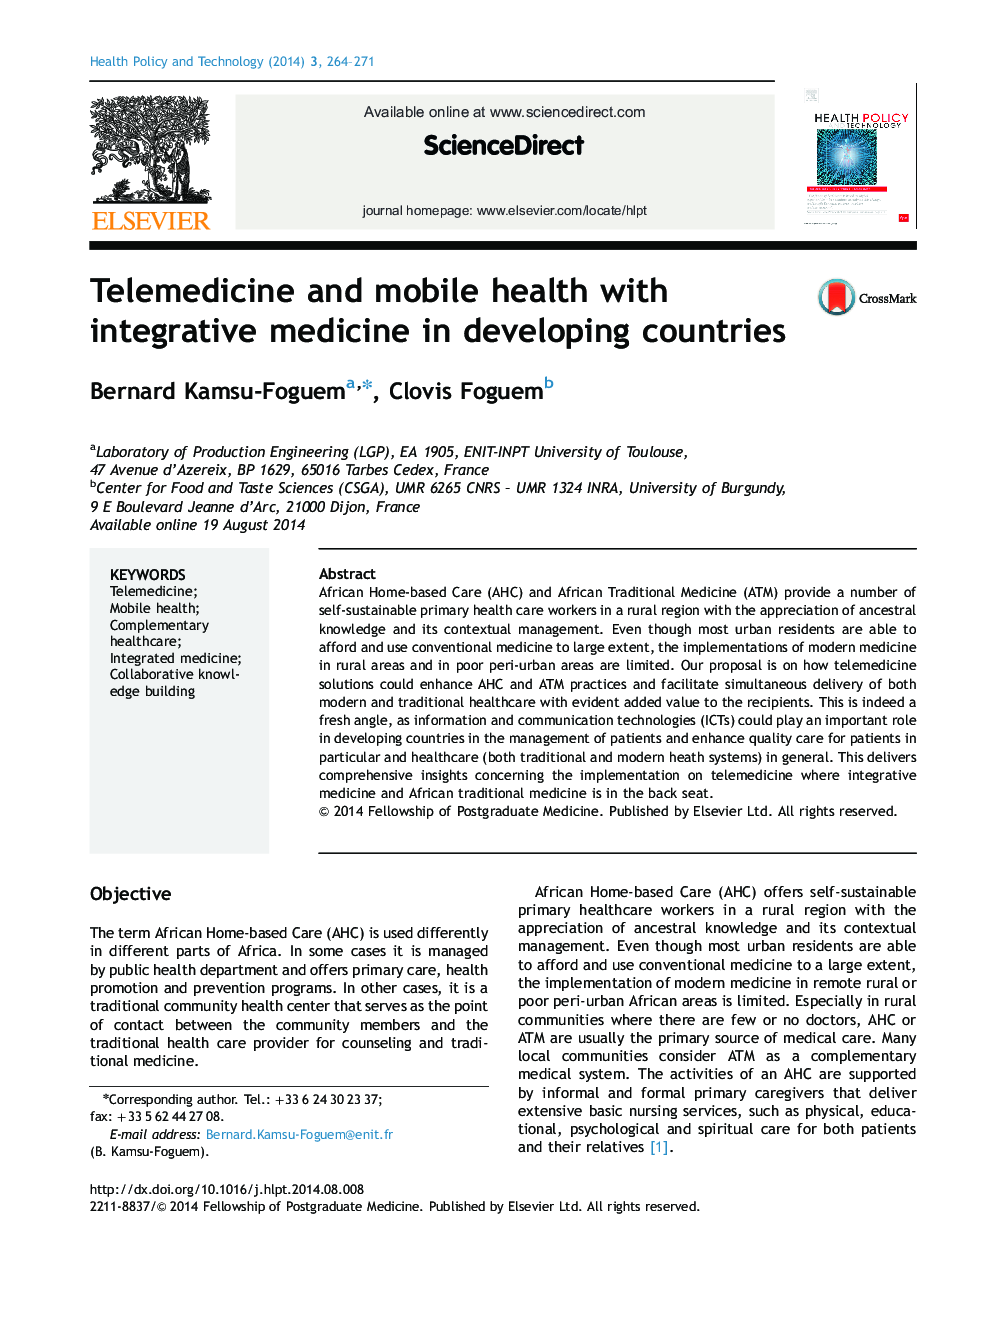 Telemedicine and mobile health with integrative medicine in developing countries